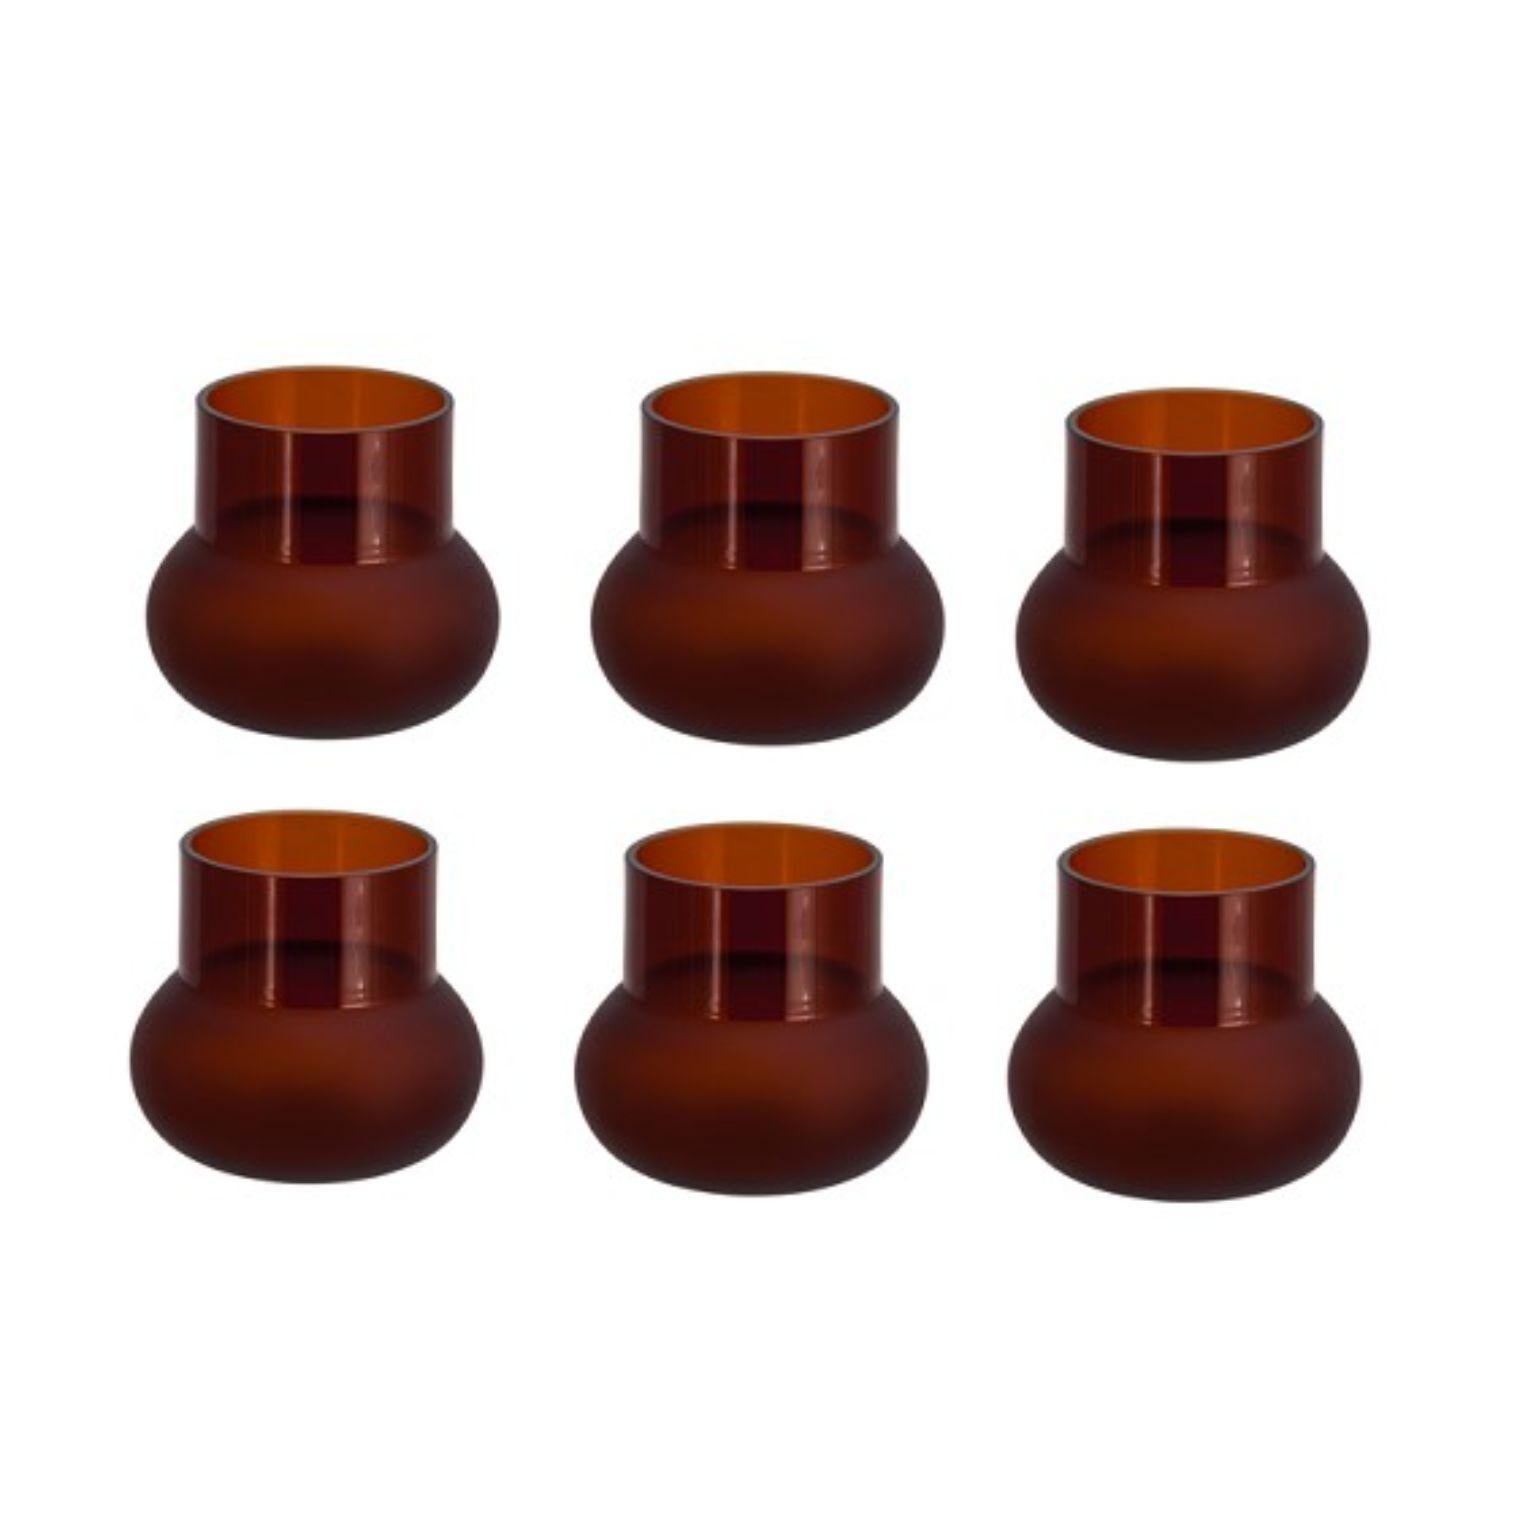 Set of 6 dark amber glasses by Pulpo
Dimensions: D10 x H9 cm
Materials: handmade glass

Pick them, pour them, roll them, and hold them; a kaleidoscope of colour, form and texture awaits. The potpourri collections by German designer Meike Harde